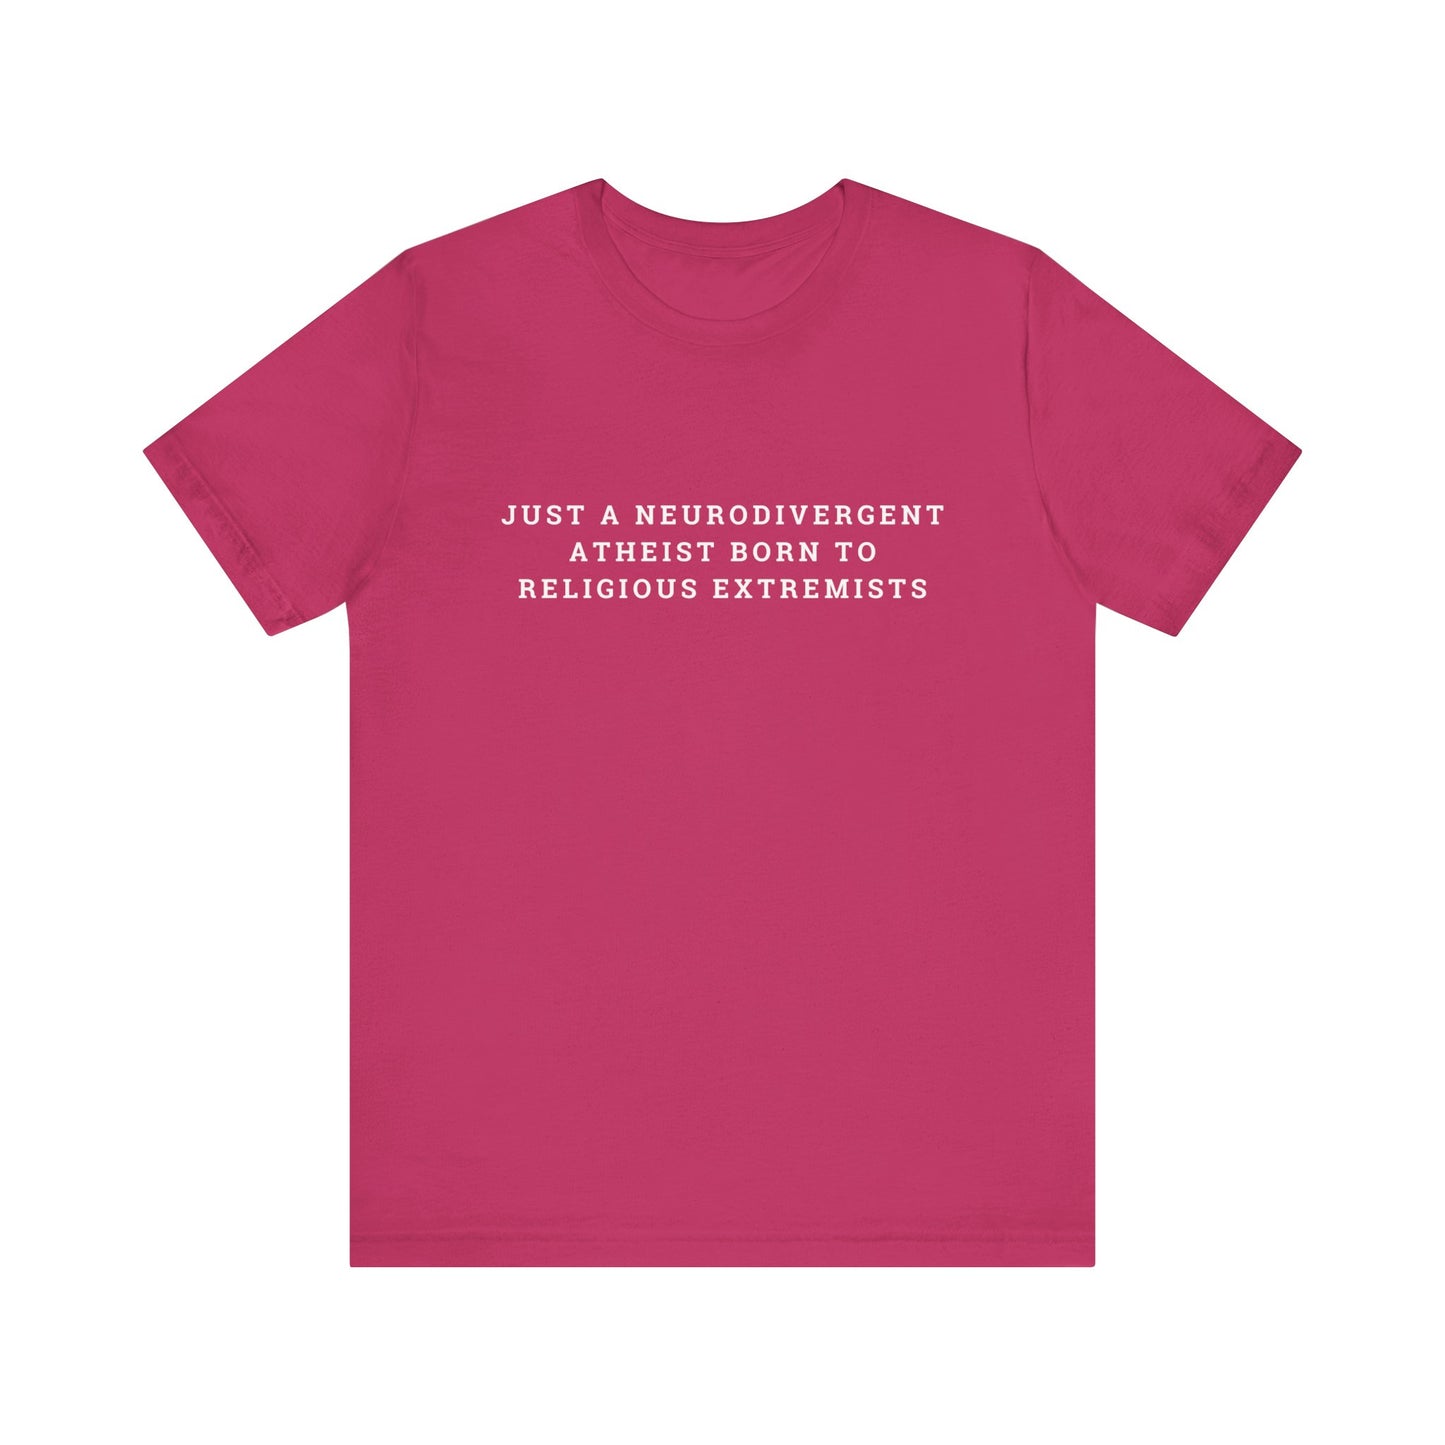 Just A Neurodivergent Atheist Born to Religious Extremists Unisex Jersey Short Sleeve Tee